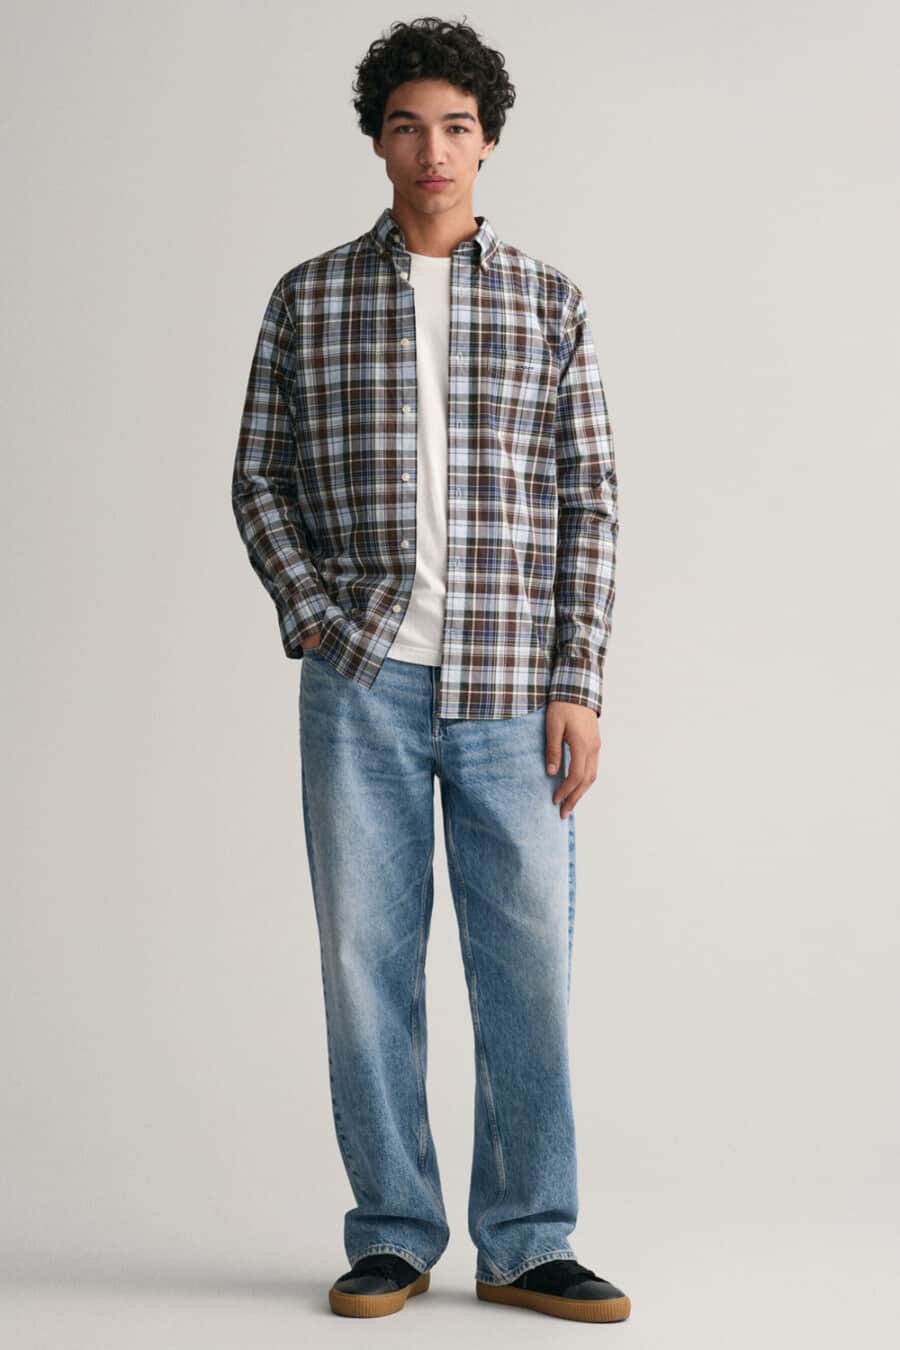 Men's light-wash baggy jeans, white T-shirt, brown/blue check shirt and black gum sole sneakers outfit